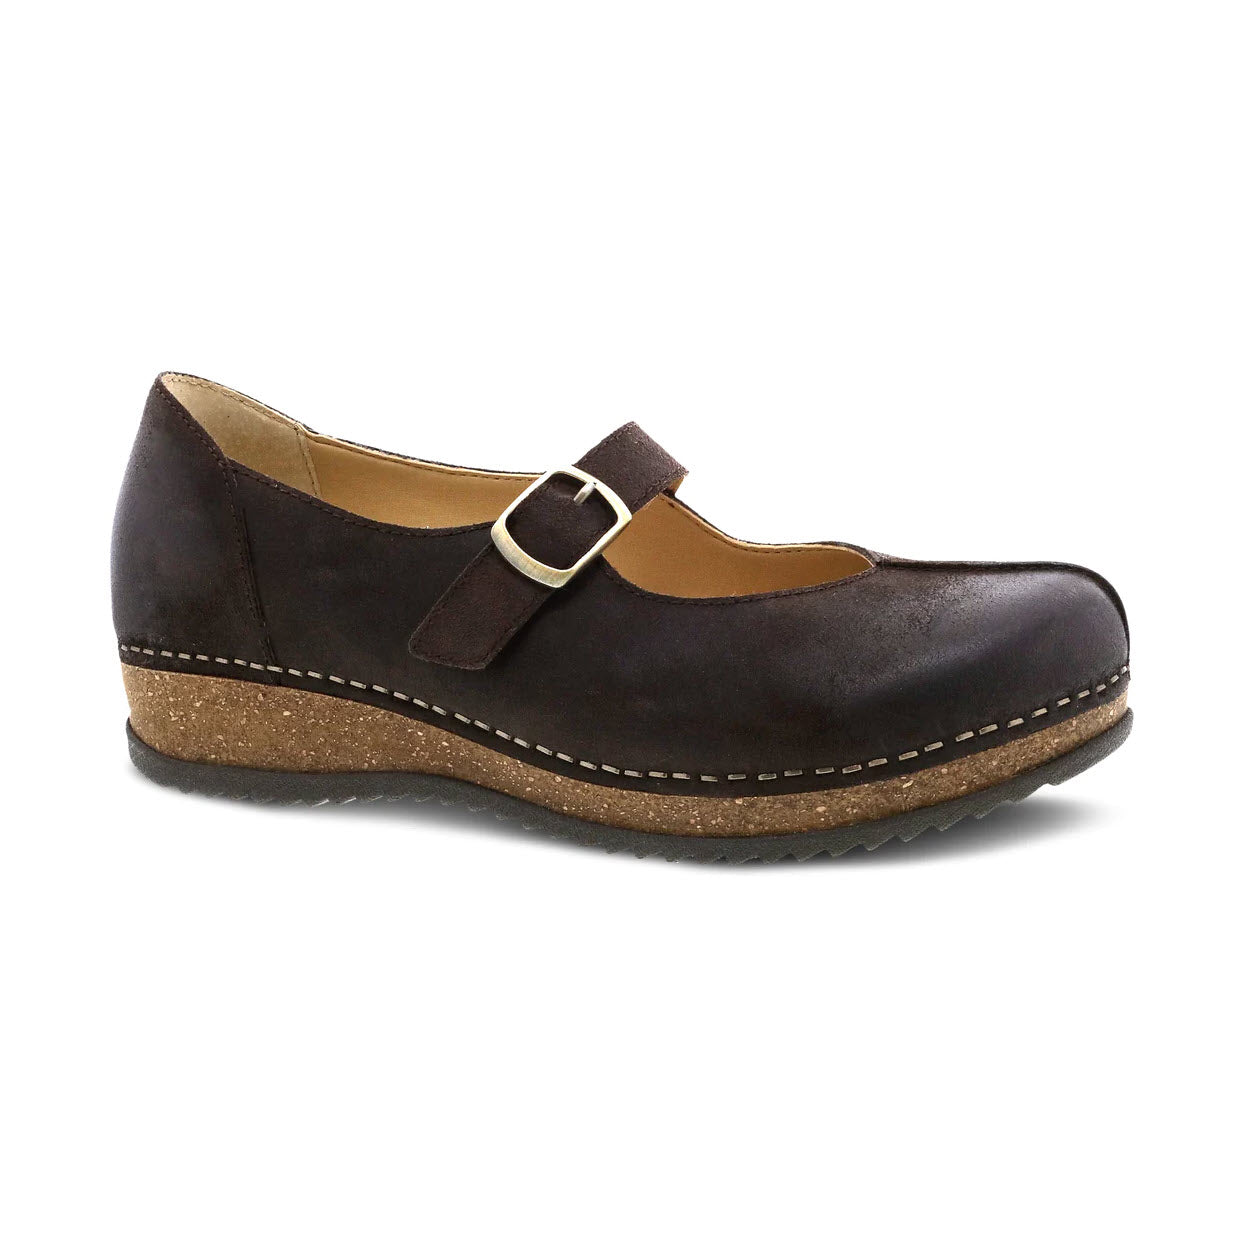 A single Dansko Mika Chocolate Burnished Suede Mary Jane shoe with a buckle strap and sustainable cork midsole, isolated on a white background.